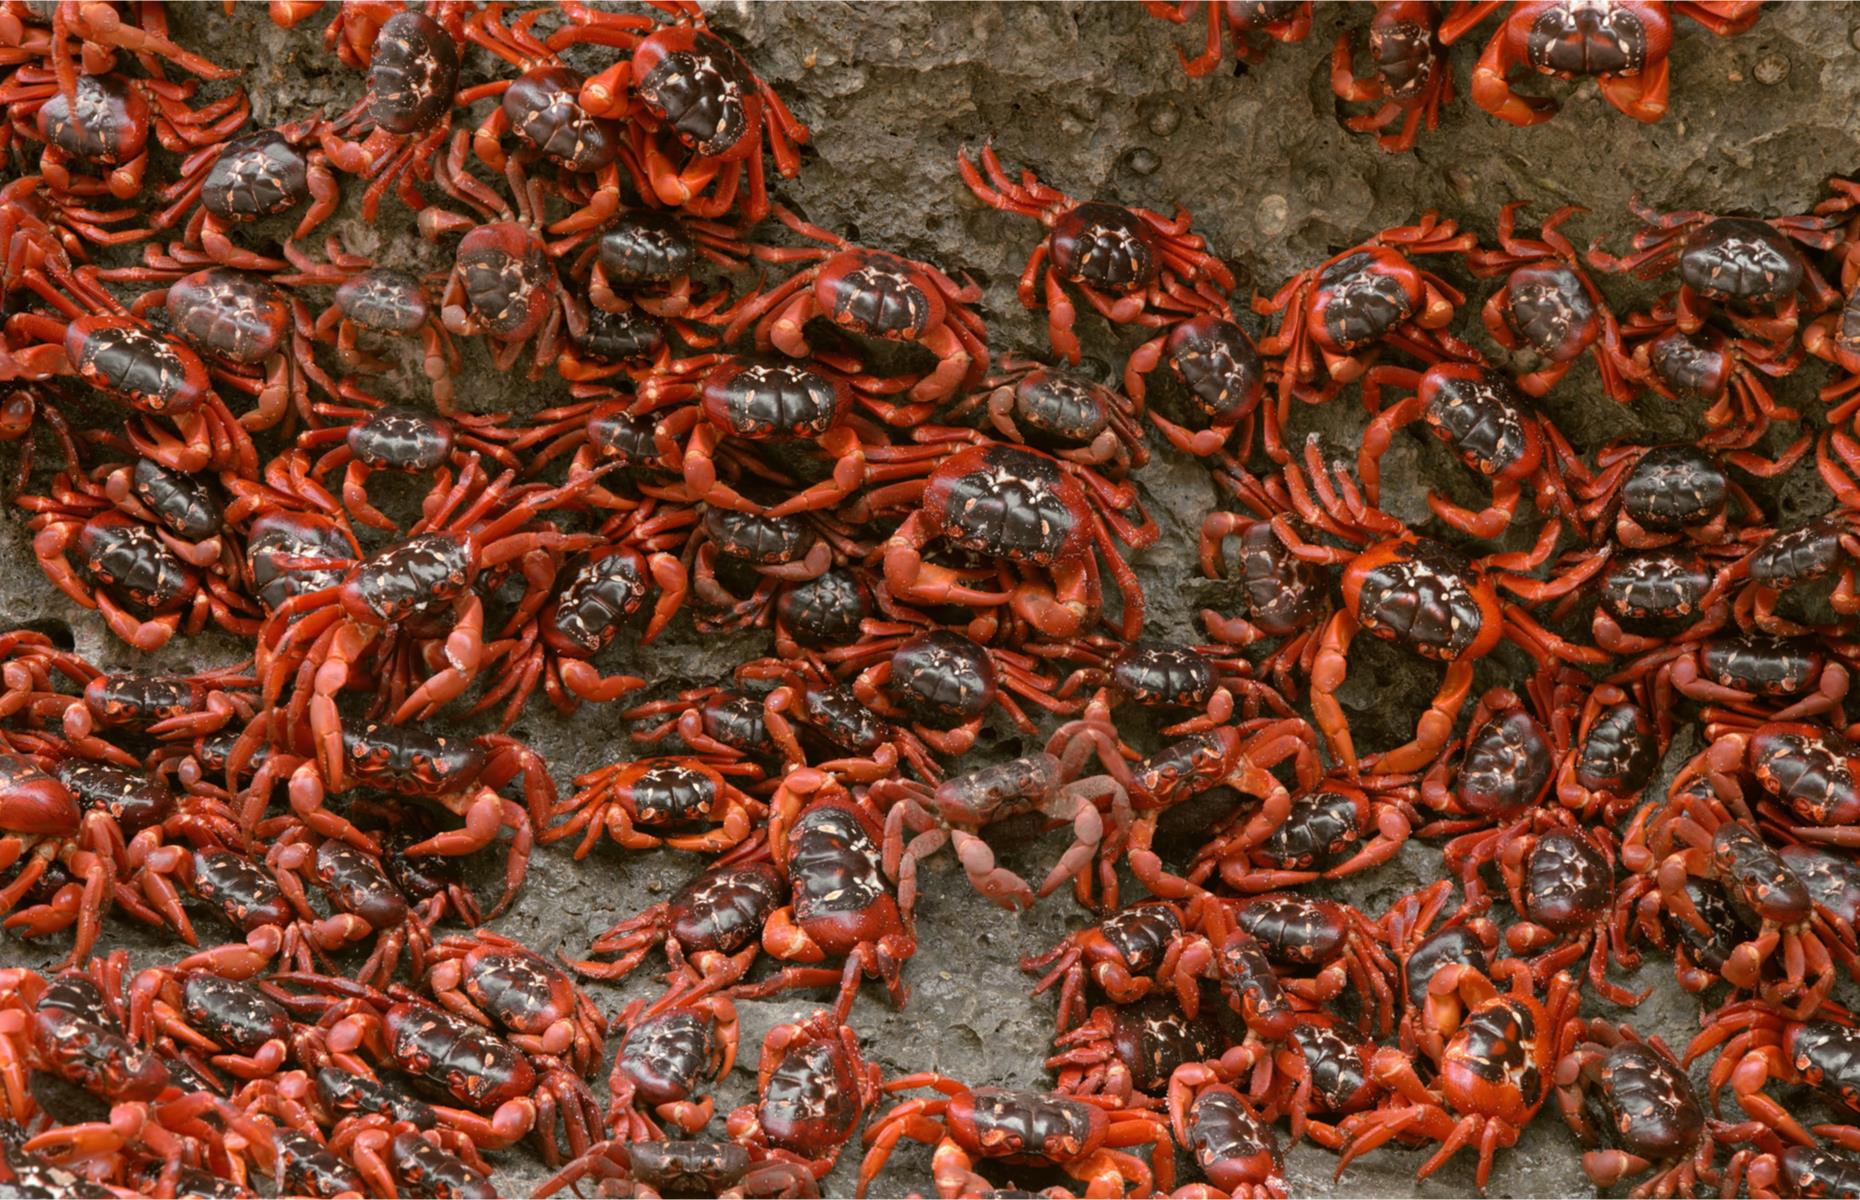 <p>As the humidity rises and the wet season arrives on Australia’s far-flung Christmas Island (usually in October or November), tens of millions of red crabs begin their colossal migration from coast to coast in order to breed and spawn. </p>